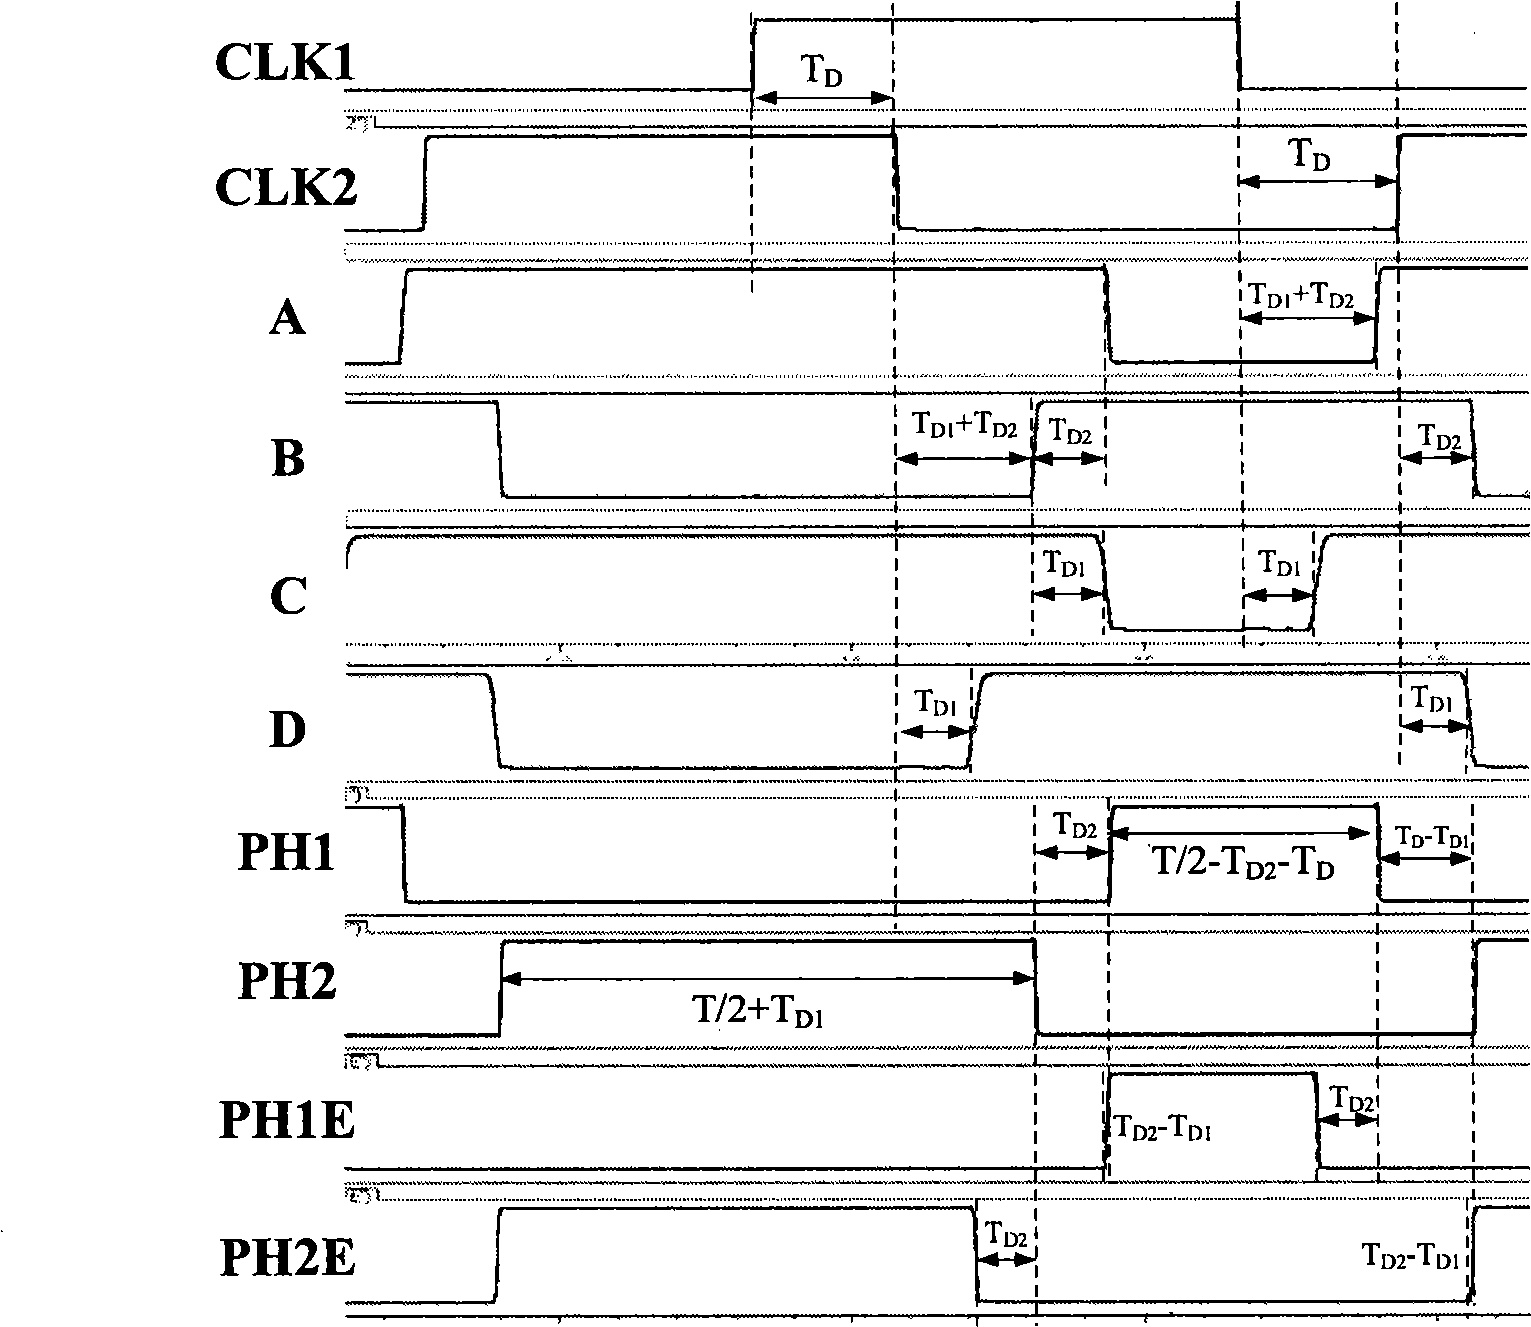 Non-overlapping clock-generating circuit with independently regulated two-phase pulse duration